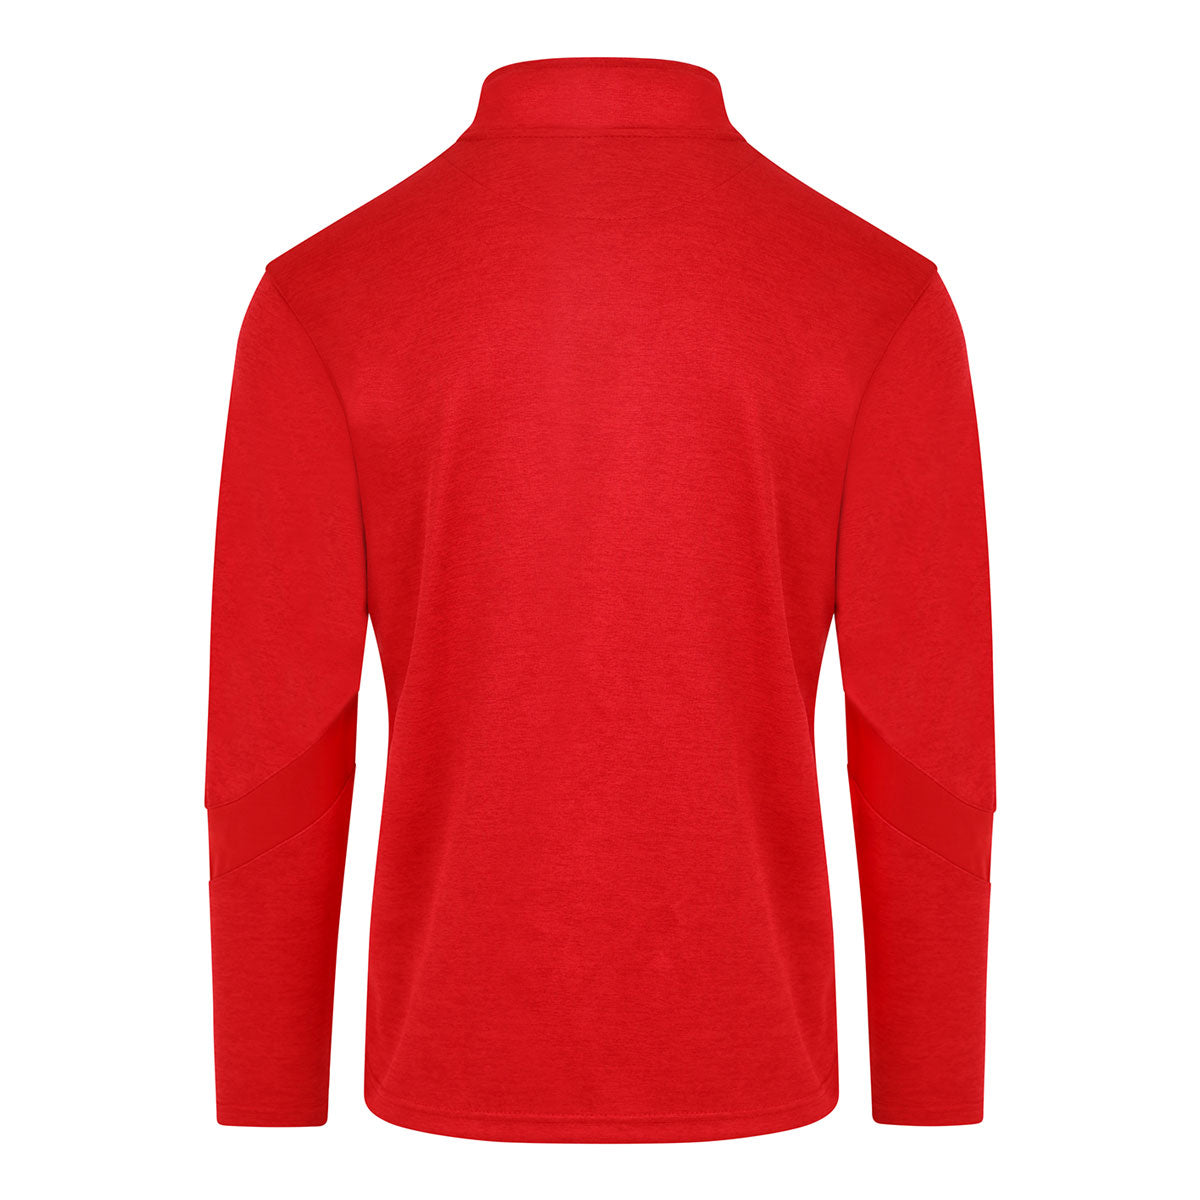 Mc Keever St Michael's Magheralin Core 22 1/4 Zip Top - Adult - Red